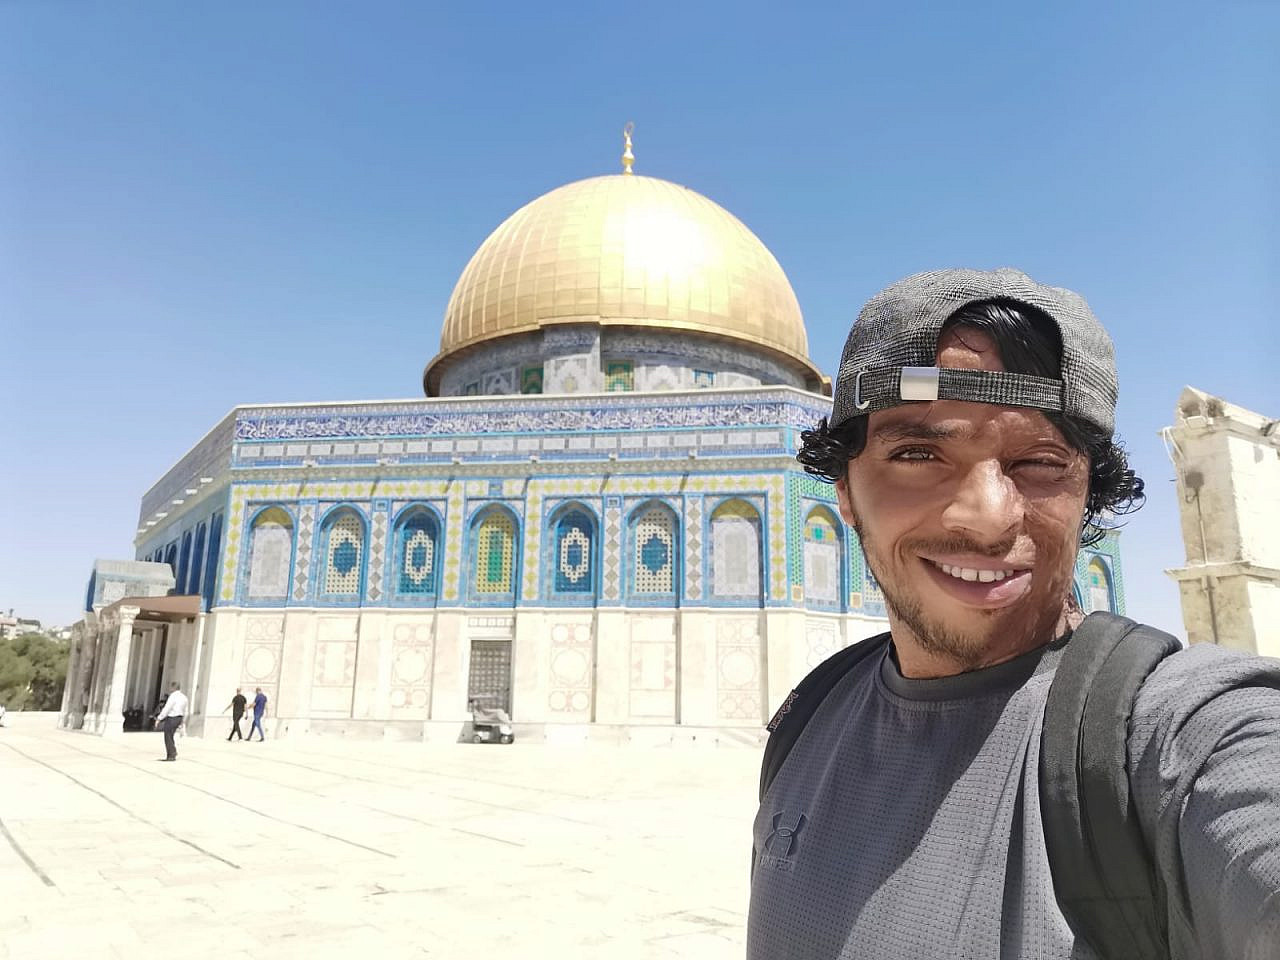 The author in front of the Dome of the Rock. (Awdah Hathaleen)